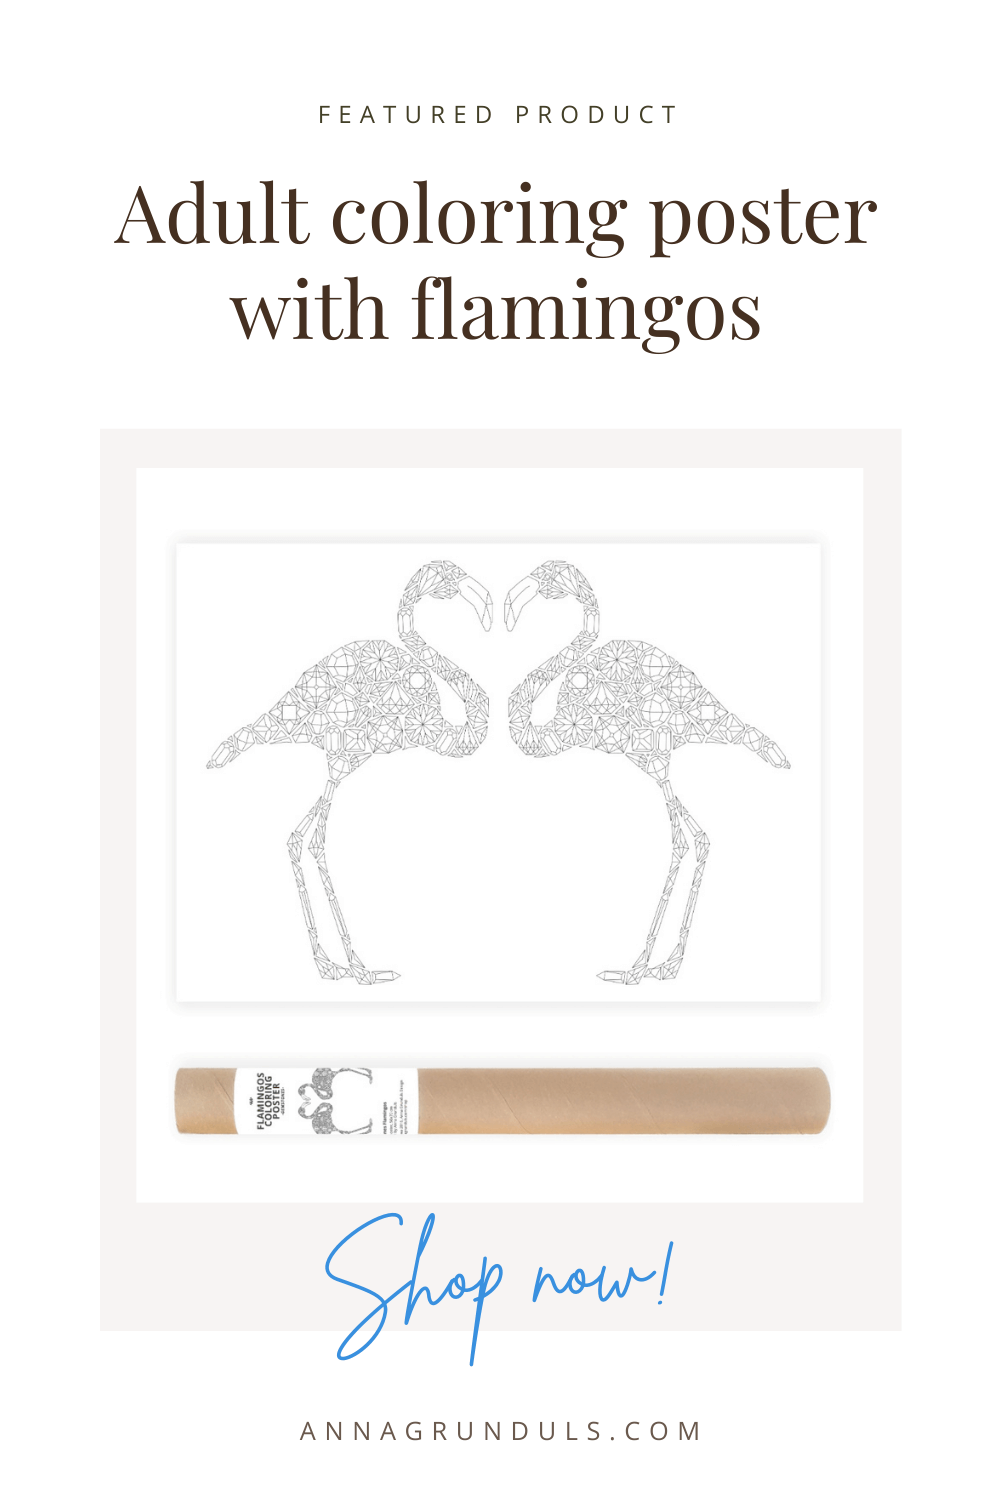 romantic flamingos poster for adult coloring pinterest pin